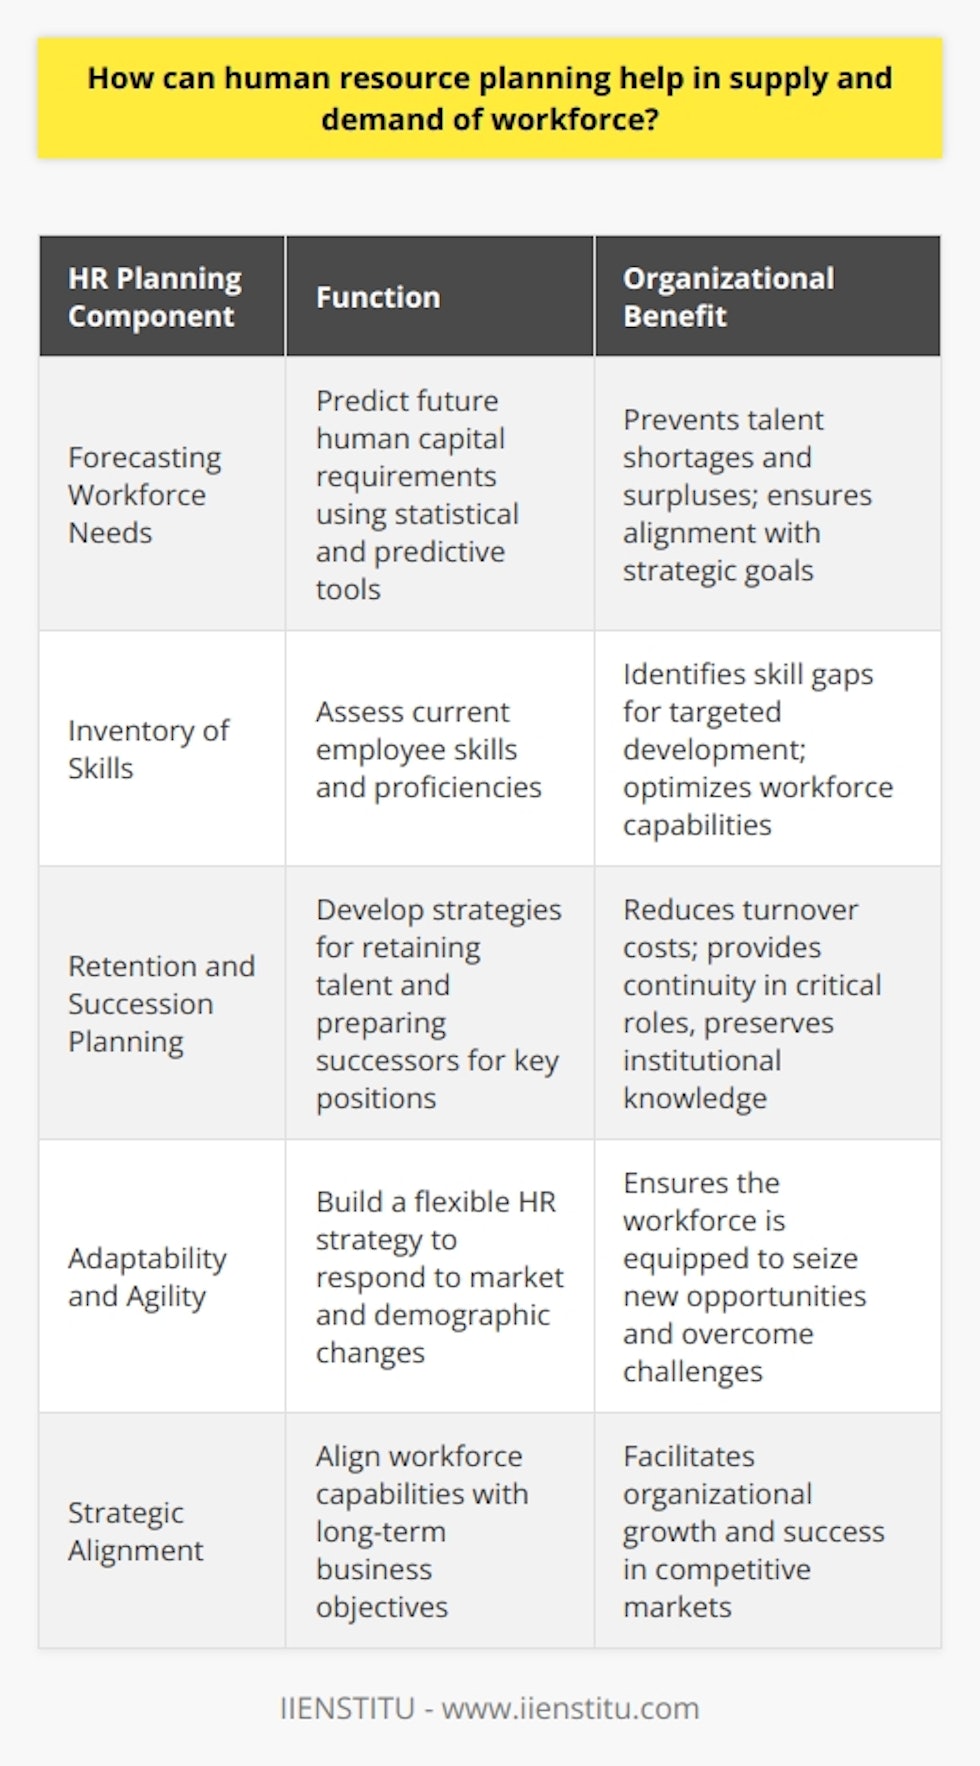 Human resource planning serves as the cornerstone for ensuring an organization's workforce aligns with its strategic objectives and the ever-evolving market demands. By meticulously assessing both the current supply of talent and the future demand for specific skills, HR planning can preemptively tackle potential imbalances between workforce supply and demand.Forecasting Workforce NeedsOne of the pivotal elements of human resource planning is predicting the company’s future human capital needs. Human Resources (HR) departments use various statistical and predictive tools to anticipate the competencies and quantity of employees necessary to fulfill future business projects and meet long-term strategic goals. This forward-looking approach allows organizations to steer clear of talent shortfalls and surplus, which can respectively hinder growth or inflate costs.Inventory of SkillsSkills inventory is a practical tool within human resource planning that maps out the existing talents and proficiencies within the organization. This snapshot of internal resources enables HR professionals to pinpoint areas of skill surplus and deficit. With this knowledge, they can tailor employee development programs, such as IIENSTITU's online courses, to bridge knowledge gaps, offer career advancement opportunities, and therefore maximize the utilization of their human assets.Retention and Succession PlanningHuman resource planning isn't solely about recruiting fresh talent; it's equally about nurturing and retaining the talent you already have. Through strategic retention initiatives, organizations can reduce costly turnover, maintain a stable workforce, and preserve institutional knowledge. Succession planning further bolsters the supply side by developing internal candidates poised to fill key roles as they become available, ensuring a seamless talent pipeline and business continuity.Adaptability and AgilityThe agility afforded by an effective human resource plan cannot be overstated. A well-crafted HR strategy embodies the flexibility to respond to sudden market shifts, technological advancements, or changes in workforce demographics. This adaptability is critical for maintaining a skilled, responsive workforce primed to capitalize on new opportunities and tackle challenges head-on.In the dance of workforce supply and demand, human resource planning orchestrates the steps. By leveraging tools such as talent forecasting, skills inventories, retention strategies, and succession plans, HR practitioners can construct a resilient and flexible workforce prepared for the future. In doing so, they ensure their organizations have the human capital to thrive in a dynamic and competitive environment.